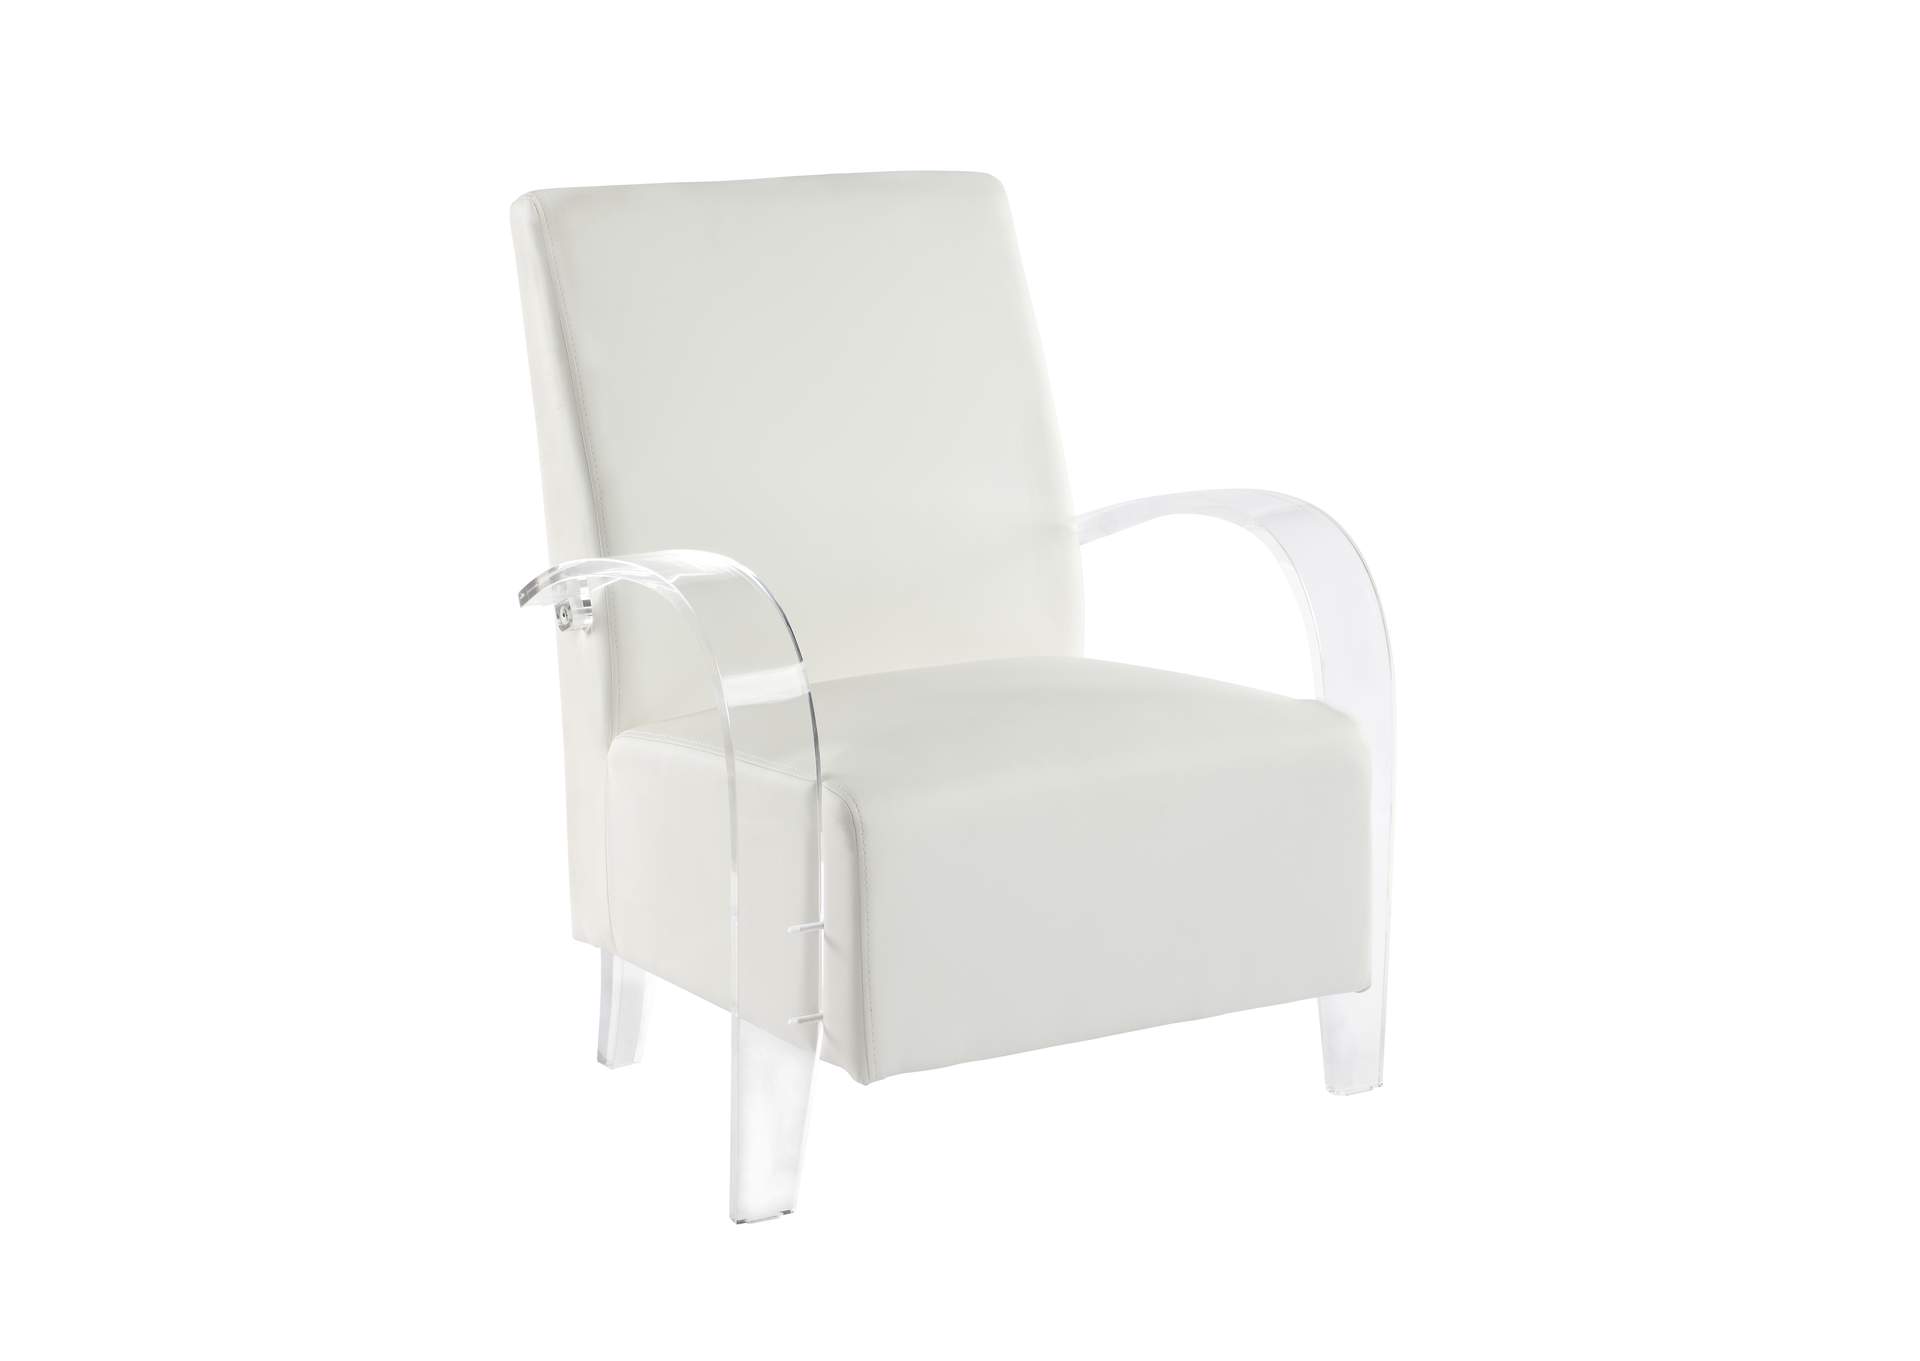 Solid Acrylic Accent Chair With Pvc Upholstery,Chintaly Imports